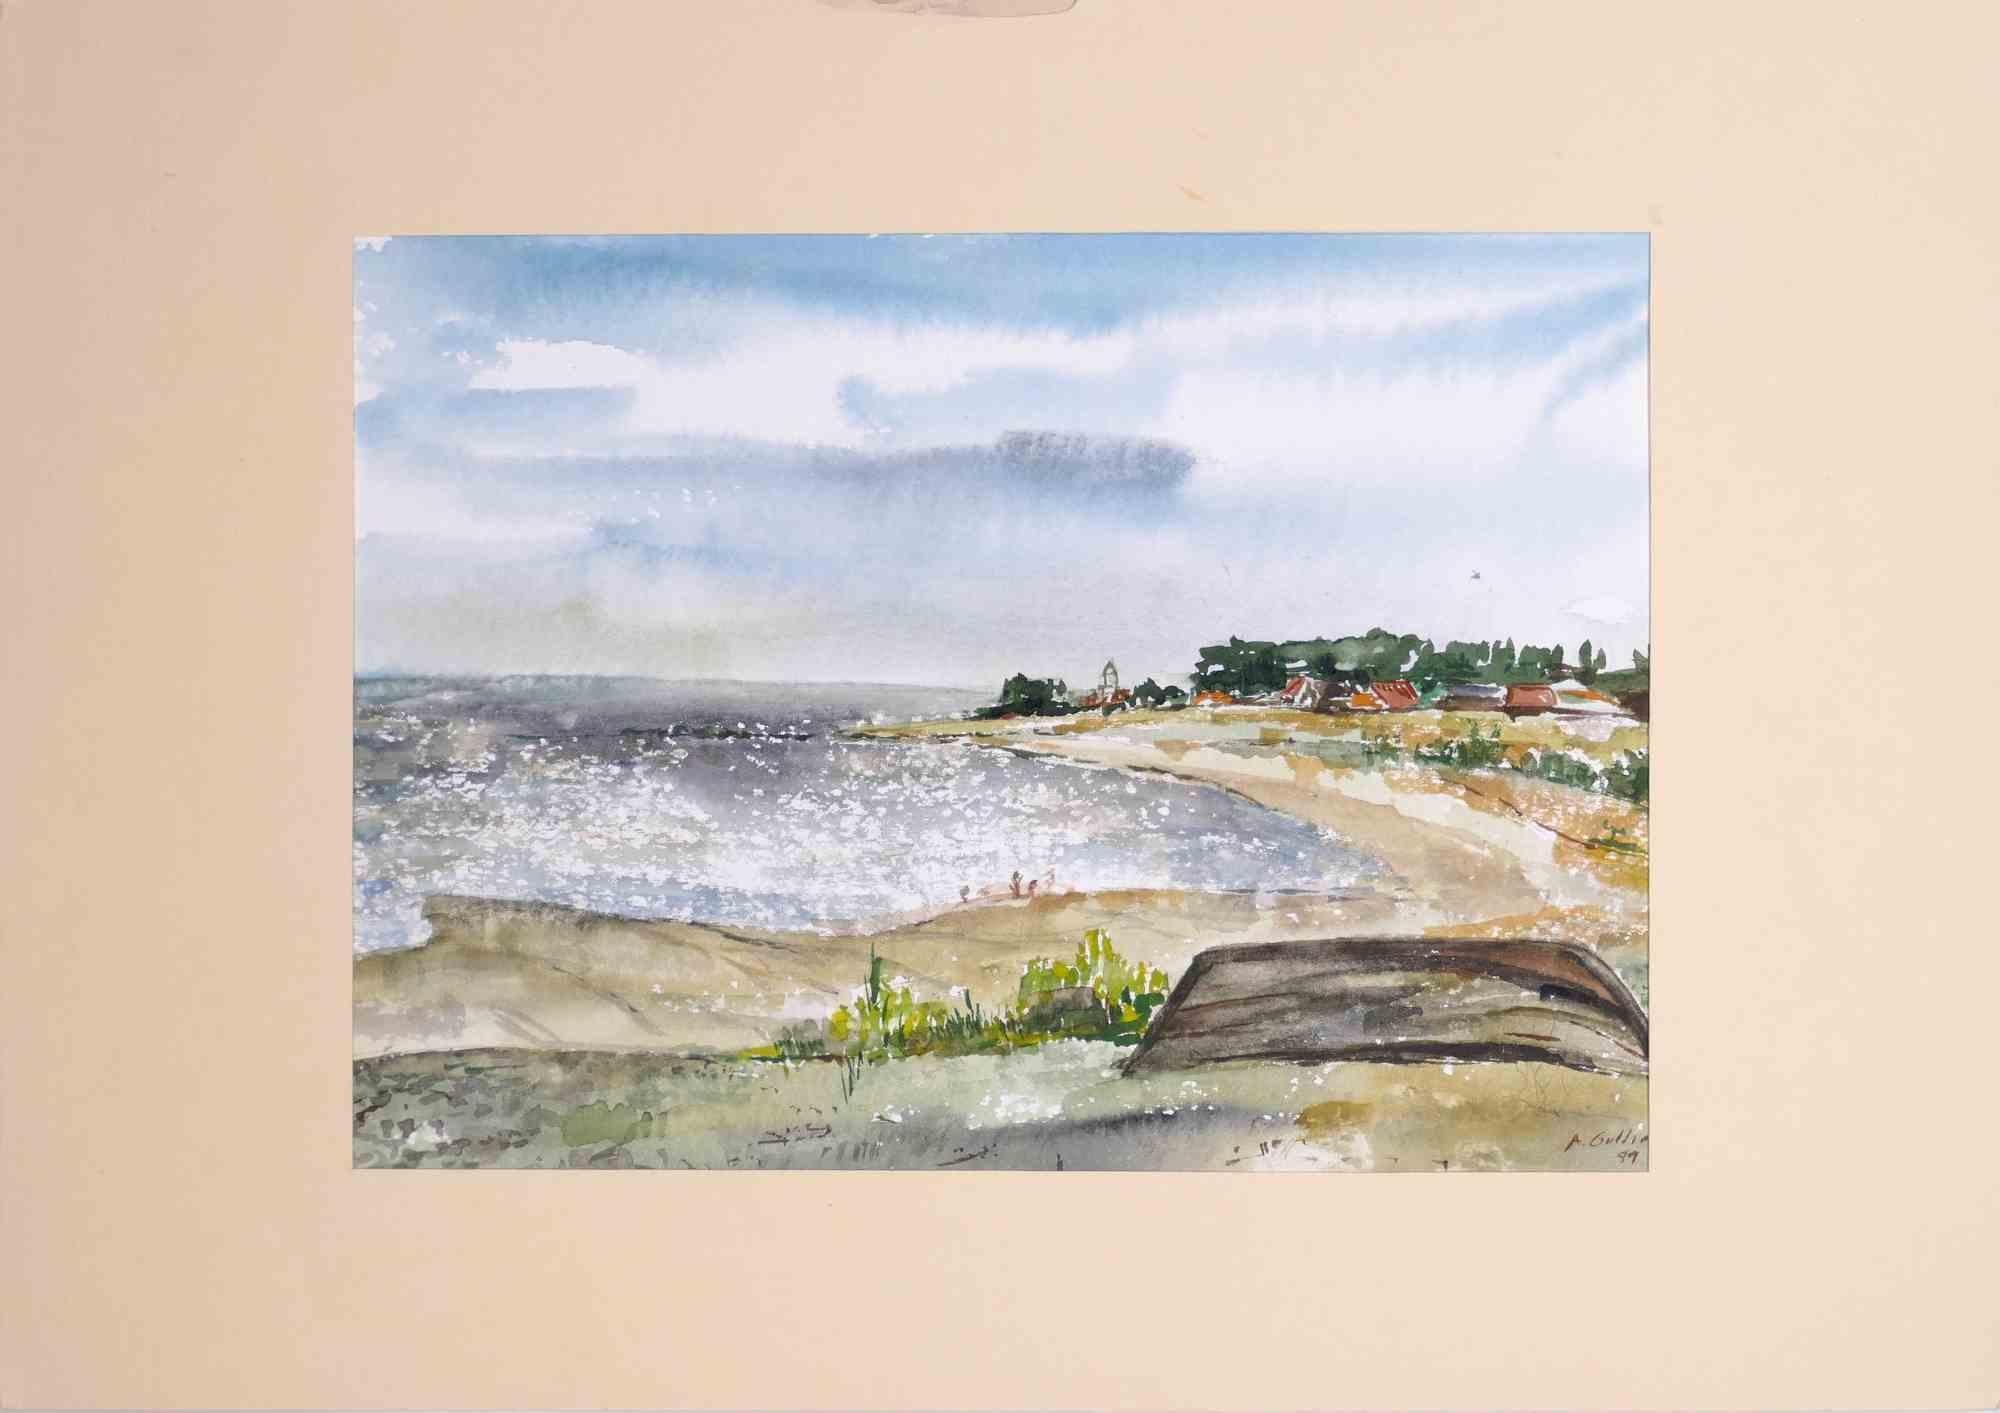 Landscape is a drawing in watercolor realized by Armin Guther in 1989.

Hand-Signed and dated.

Good conditions.

The artwork is represented through soft strokes with harmonious congruent colors beautifully.

 